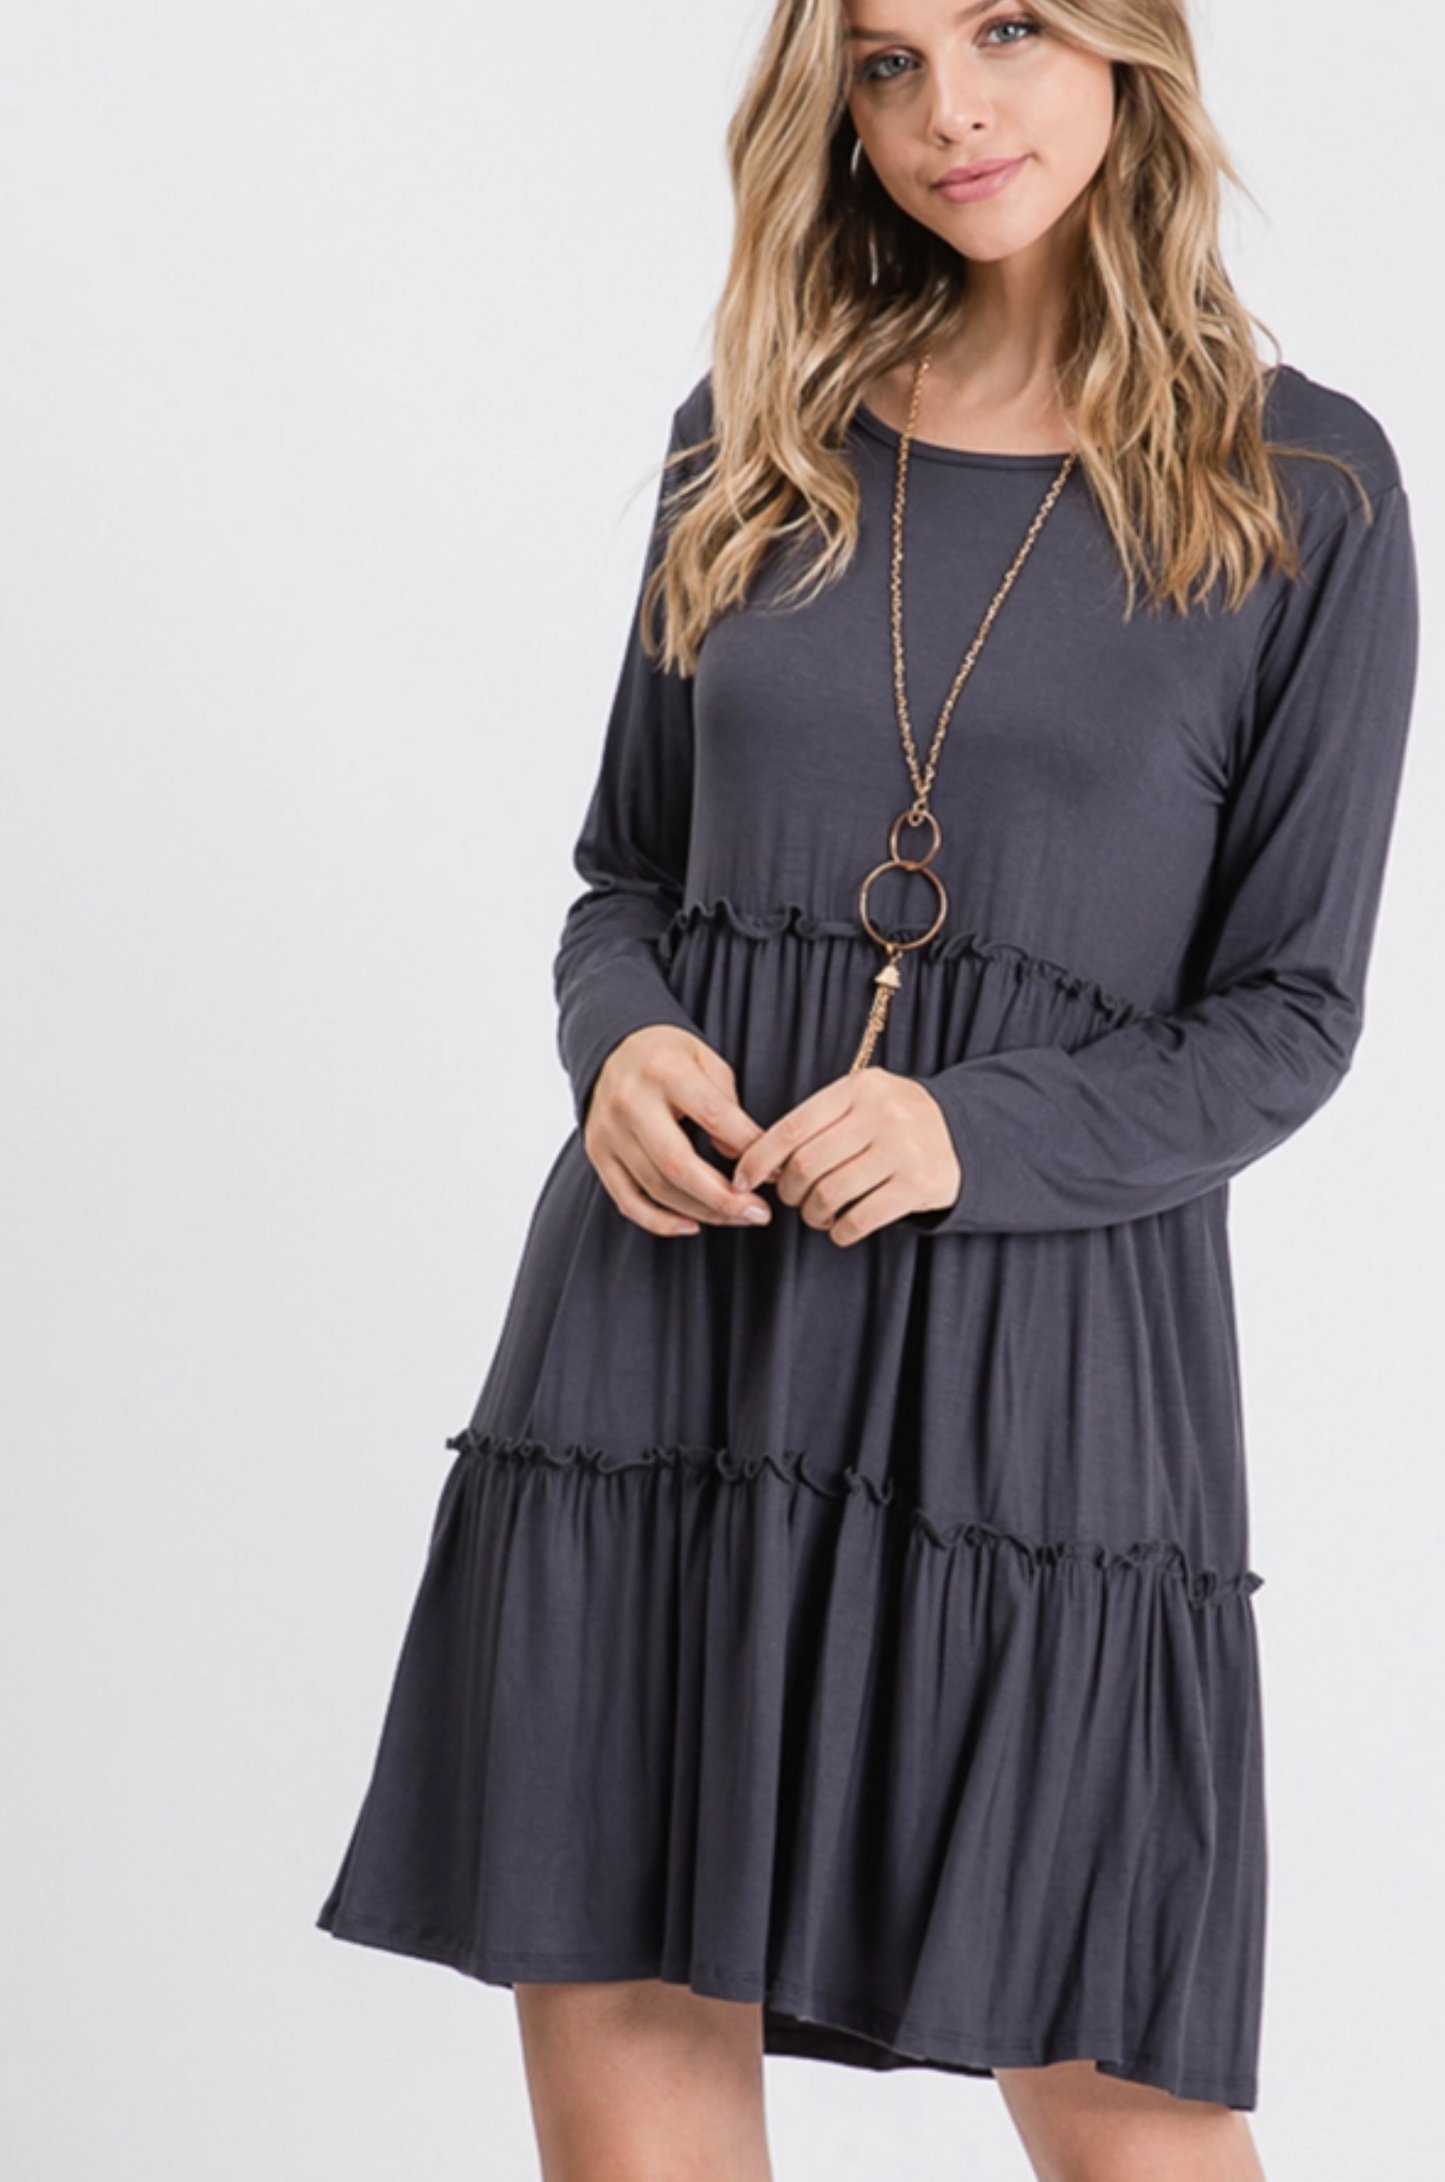 Ruffle Detail Long Sleeve Mini Dress in Charcoal - The Street Boutique 